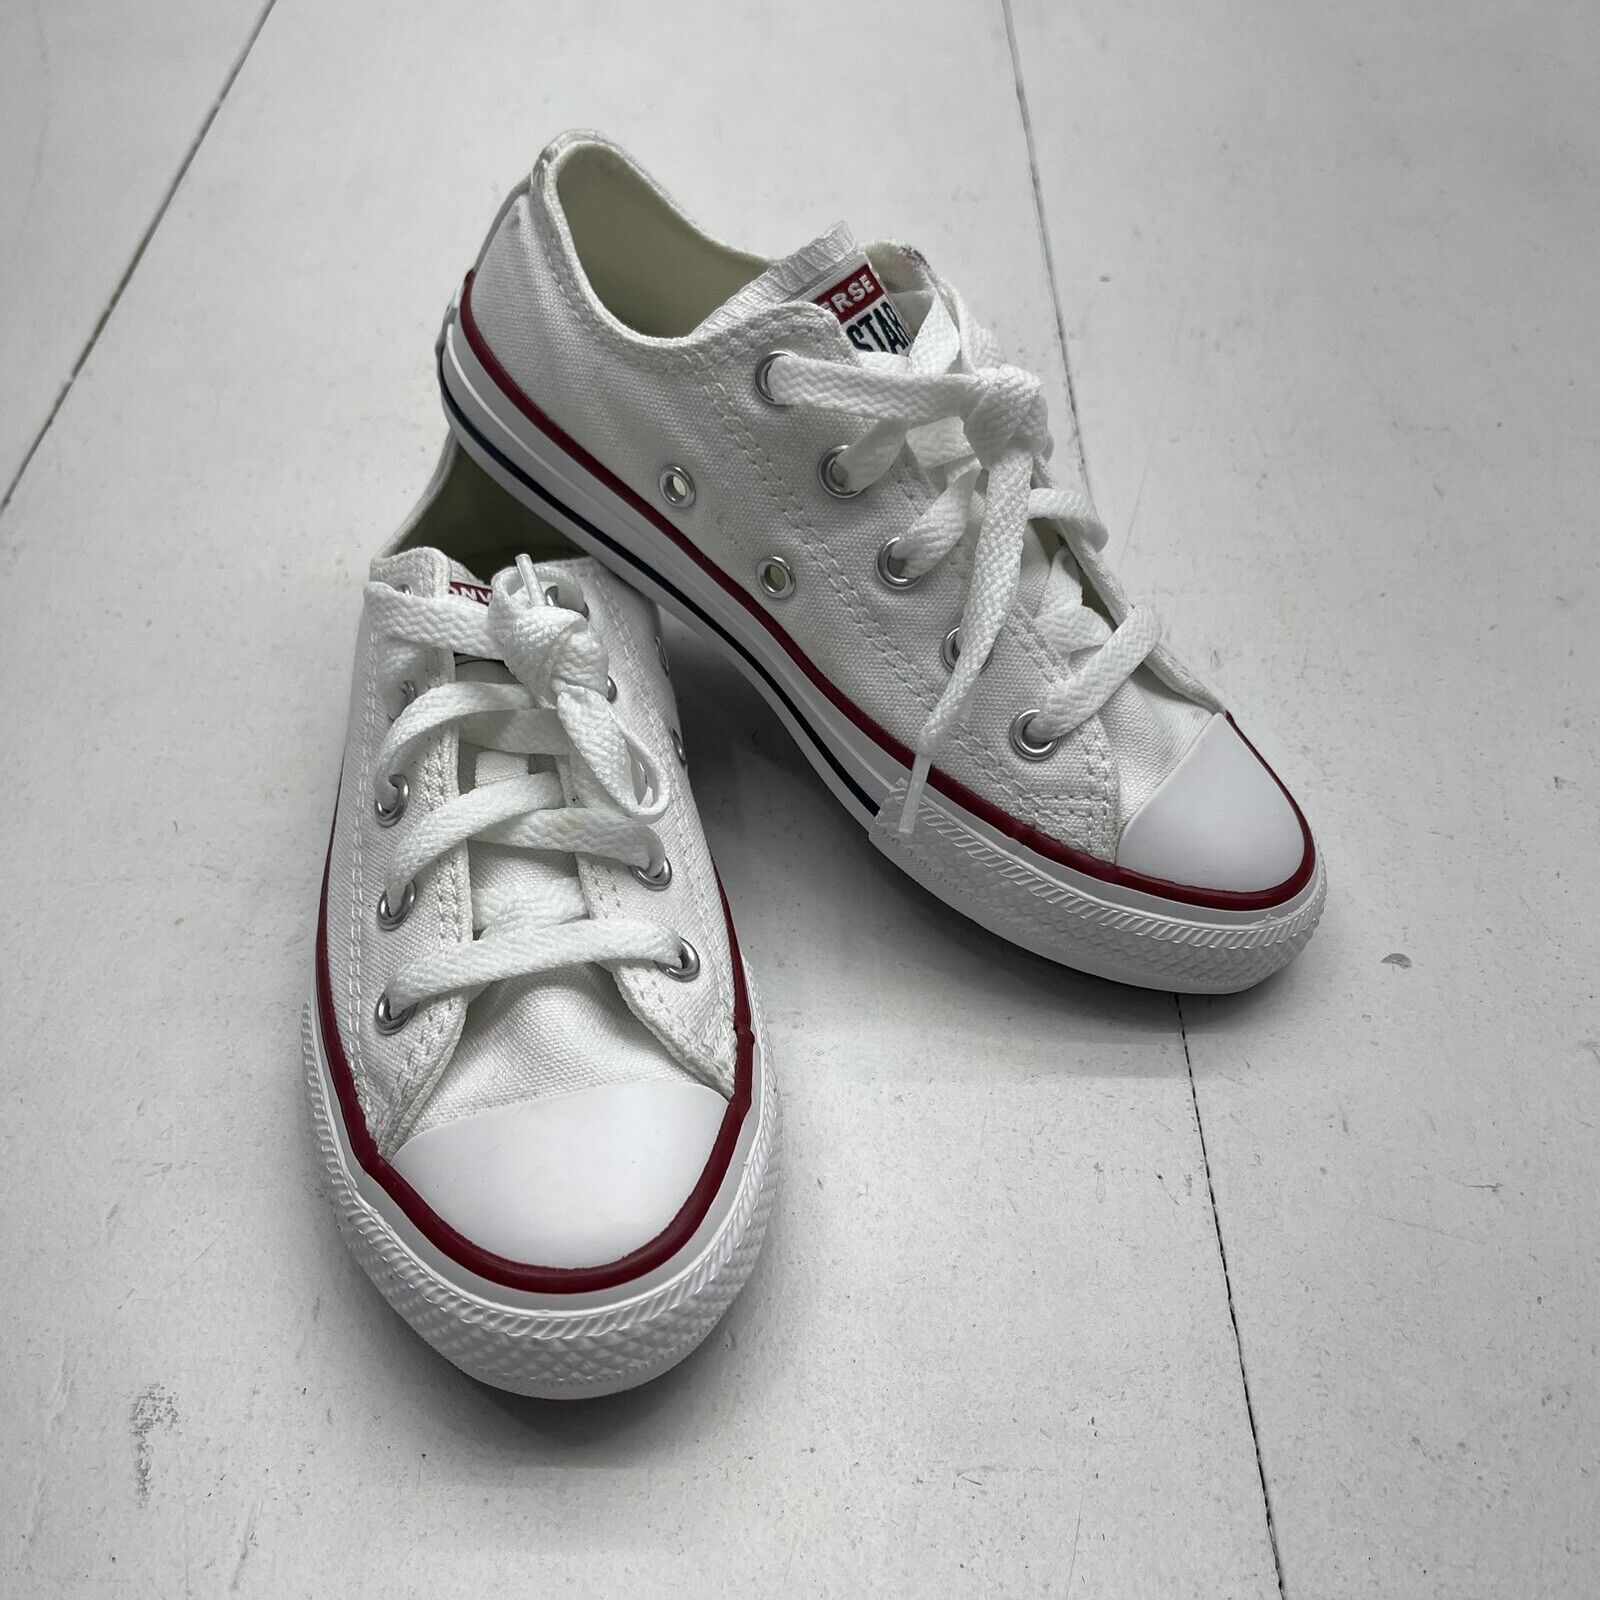 Converse All Star Classic Low Top White Canvas Sneakers Youth Kids 13 New Defect